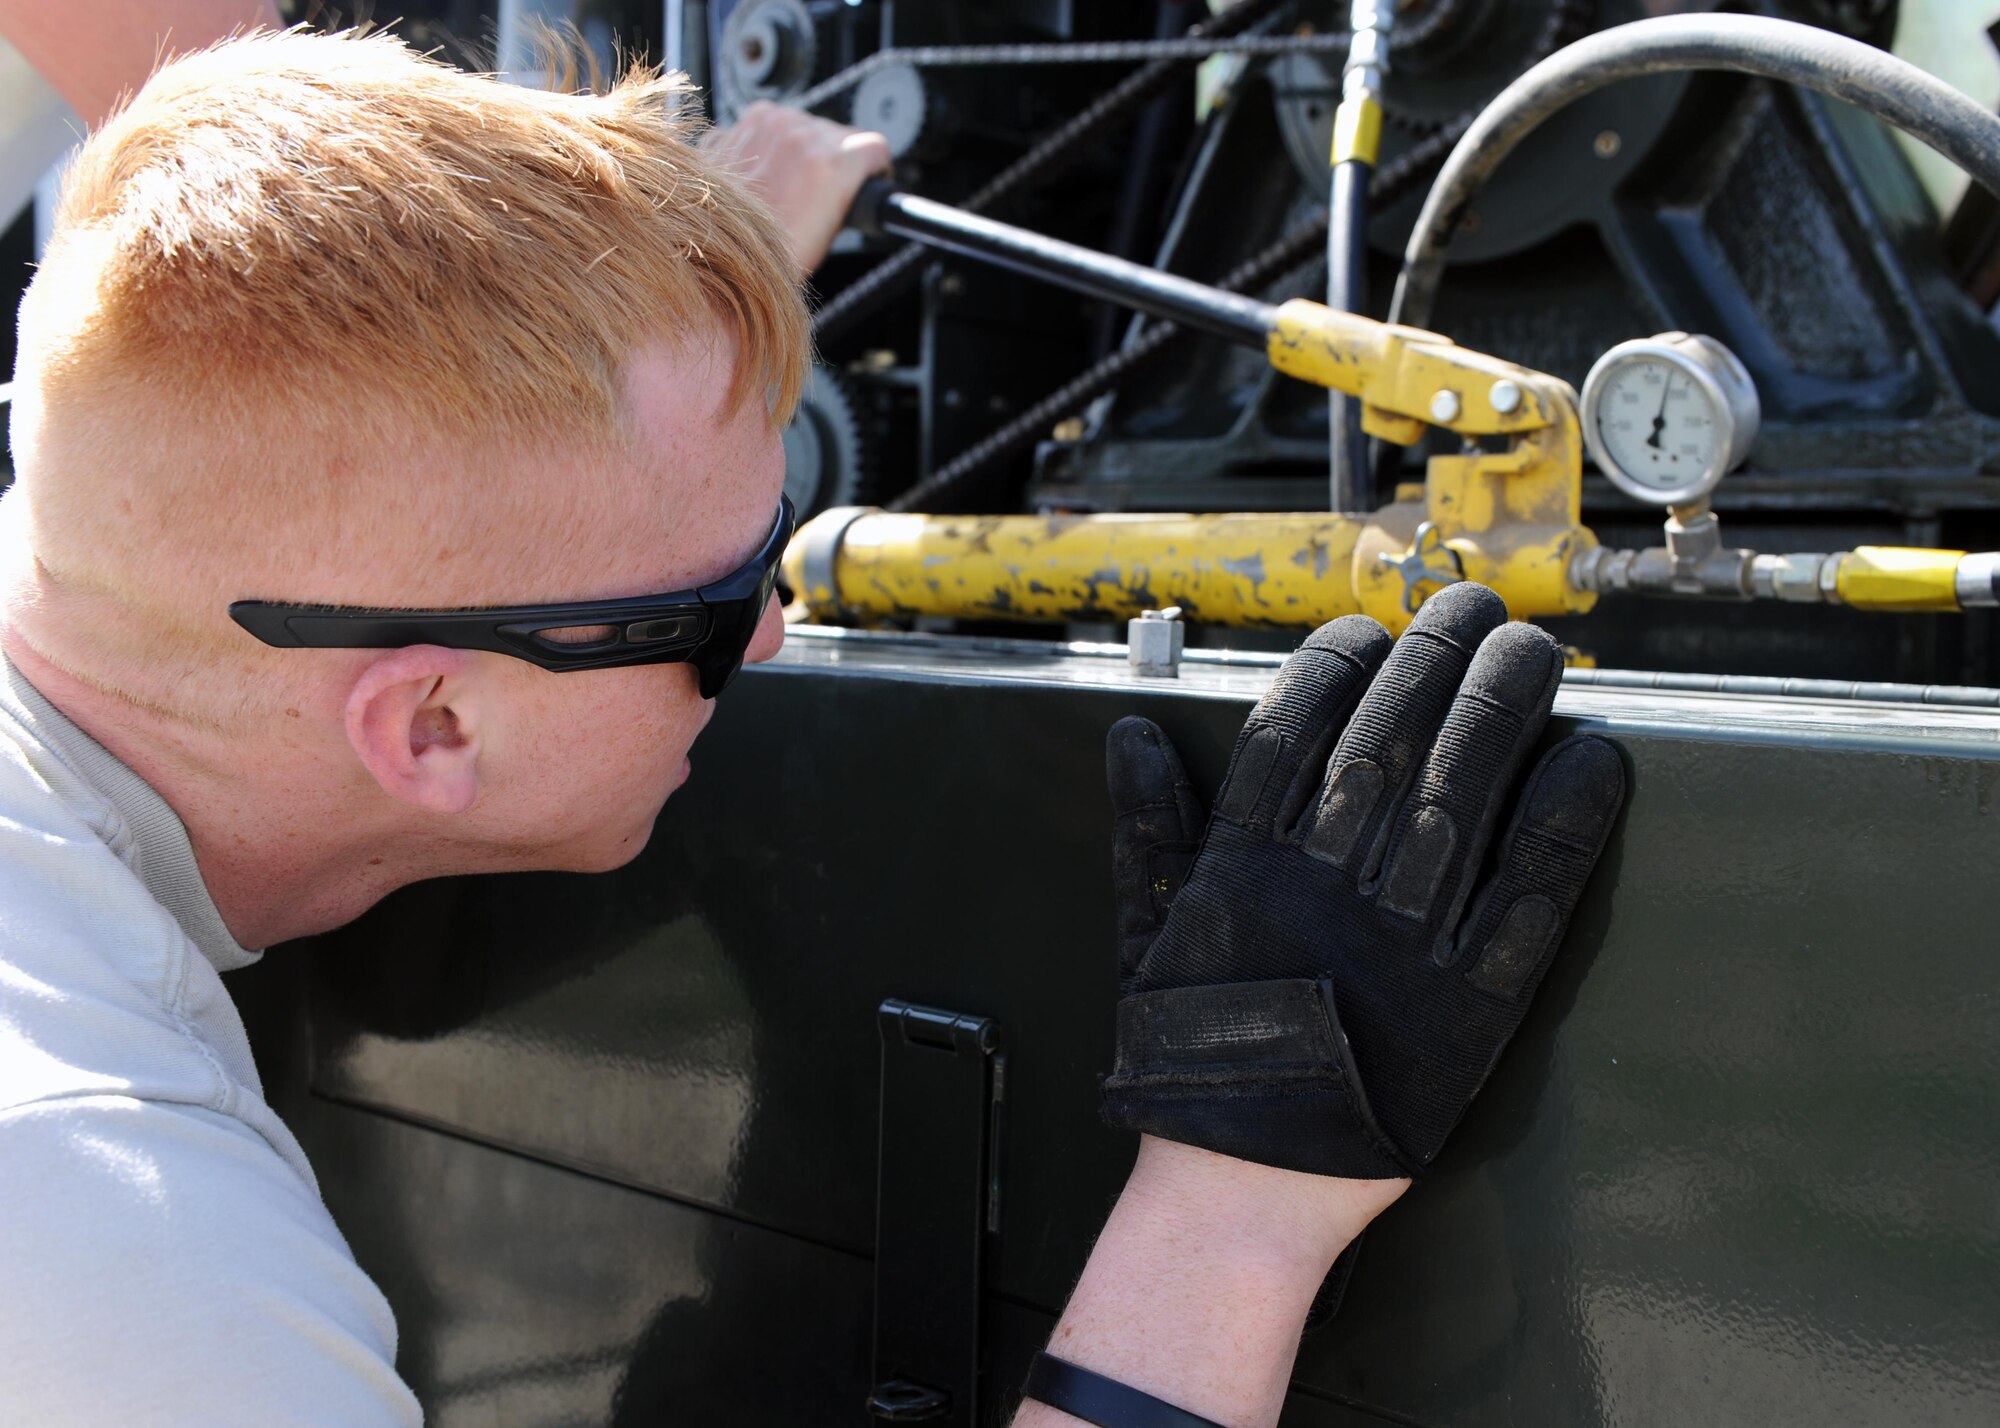 U.S. Air Force Senior Airman Bodin Rasbeck, 455th Expeditionary Civil Engineer Squadron power production journeyman, monitors a pressure gauge prior to testing a Mobile Aircraft Arresting System March 18, 2015 at Bagram Airfield, Afghanistan. The MAAS was from a separate taxiway as part of the construction of an alternate runway at Bagram. (U.S. Air Force photo by Staff Sgt. Whitney Amstutz/released)